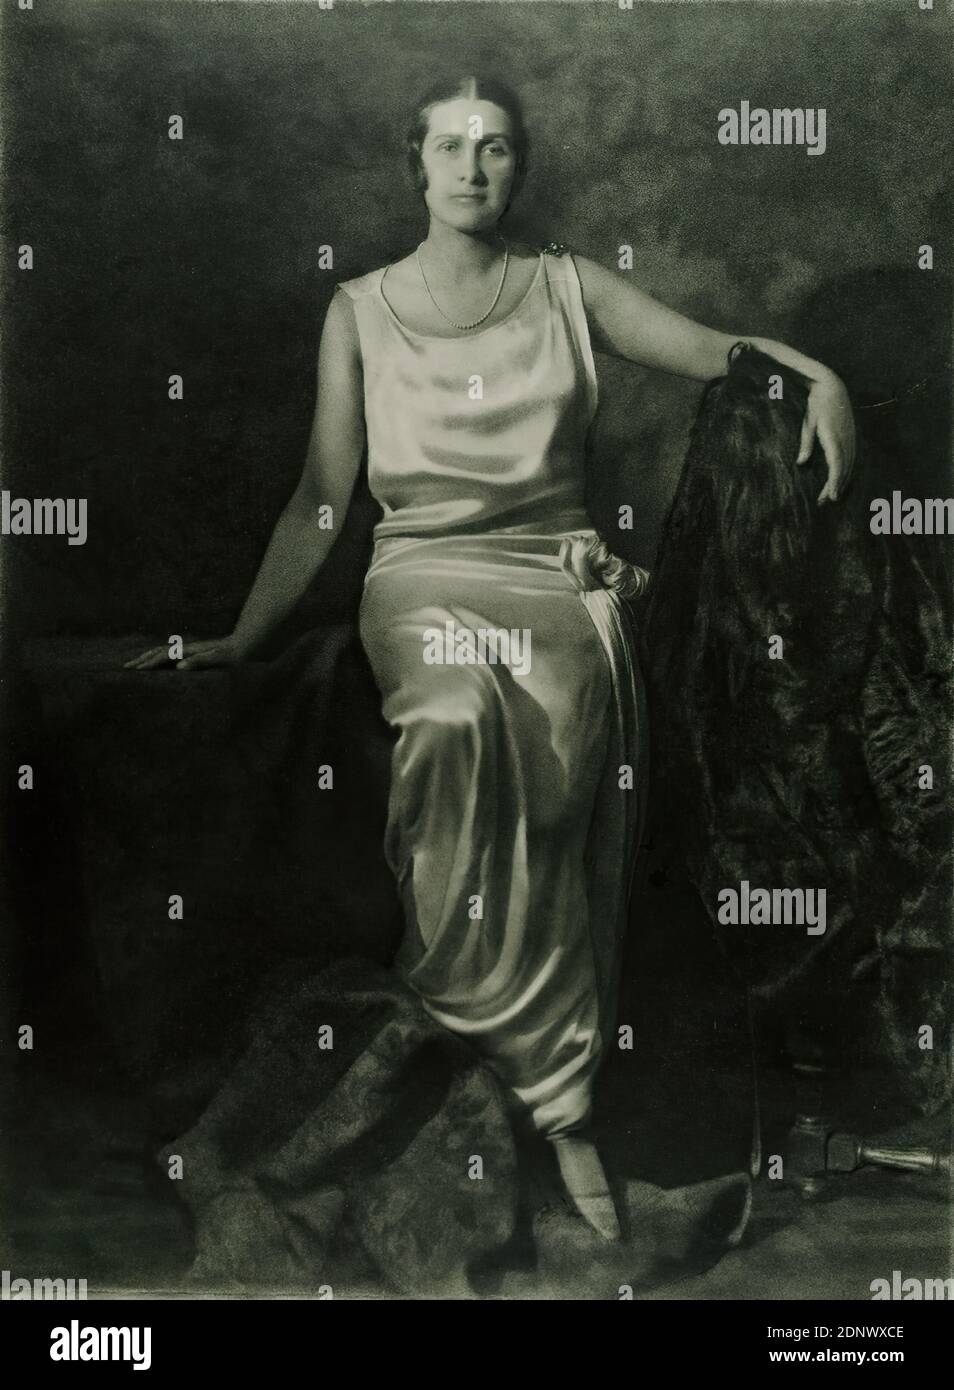 Franz Grainer, portrait of a woman, Staatliche Landesbildstelle Hamburg, collection on the history of photography, paper, bromoil print, image size: height: 47,8 cm; width: 34,5 cm, signed: recto u. re. in lead: Grainer, stamp: verso and left: stamp and object inscription of the Staatliche Landesbildstelle Hamburg, portrait photography, full-length portrait, en face (frontal view), fashion, clothing, woman, portrait Stock Photo